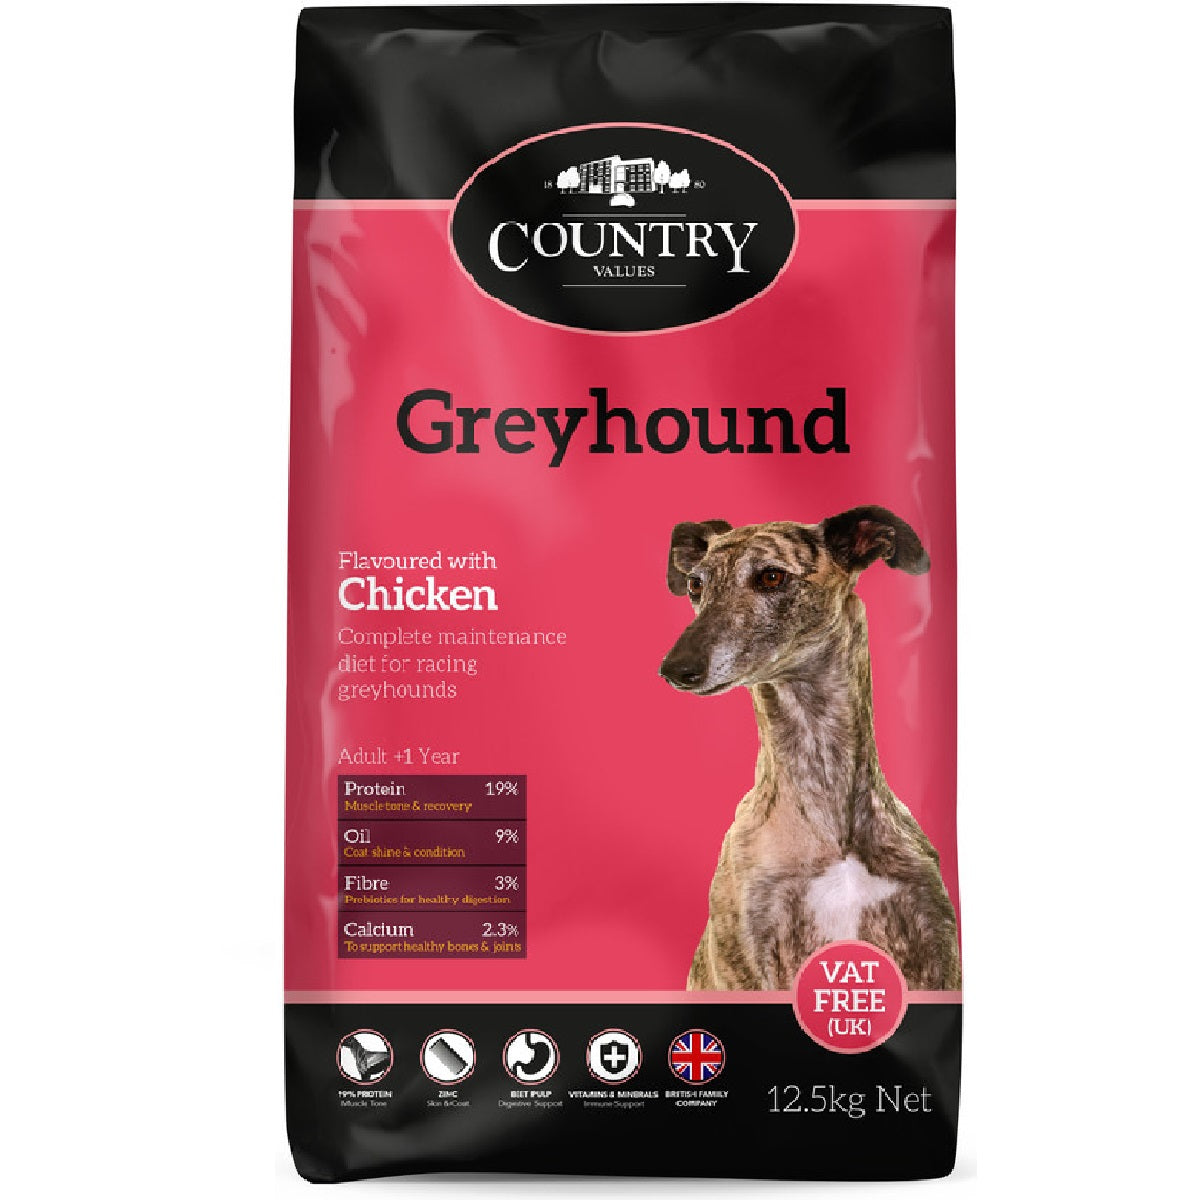 Country Values - Greyhound